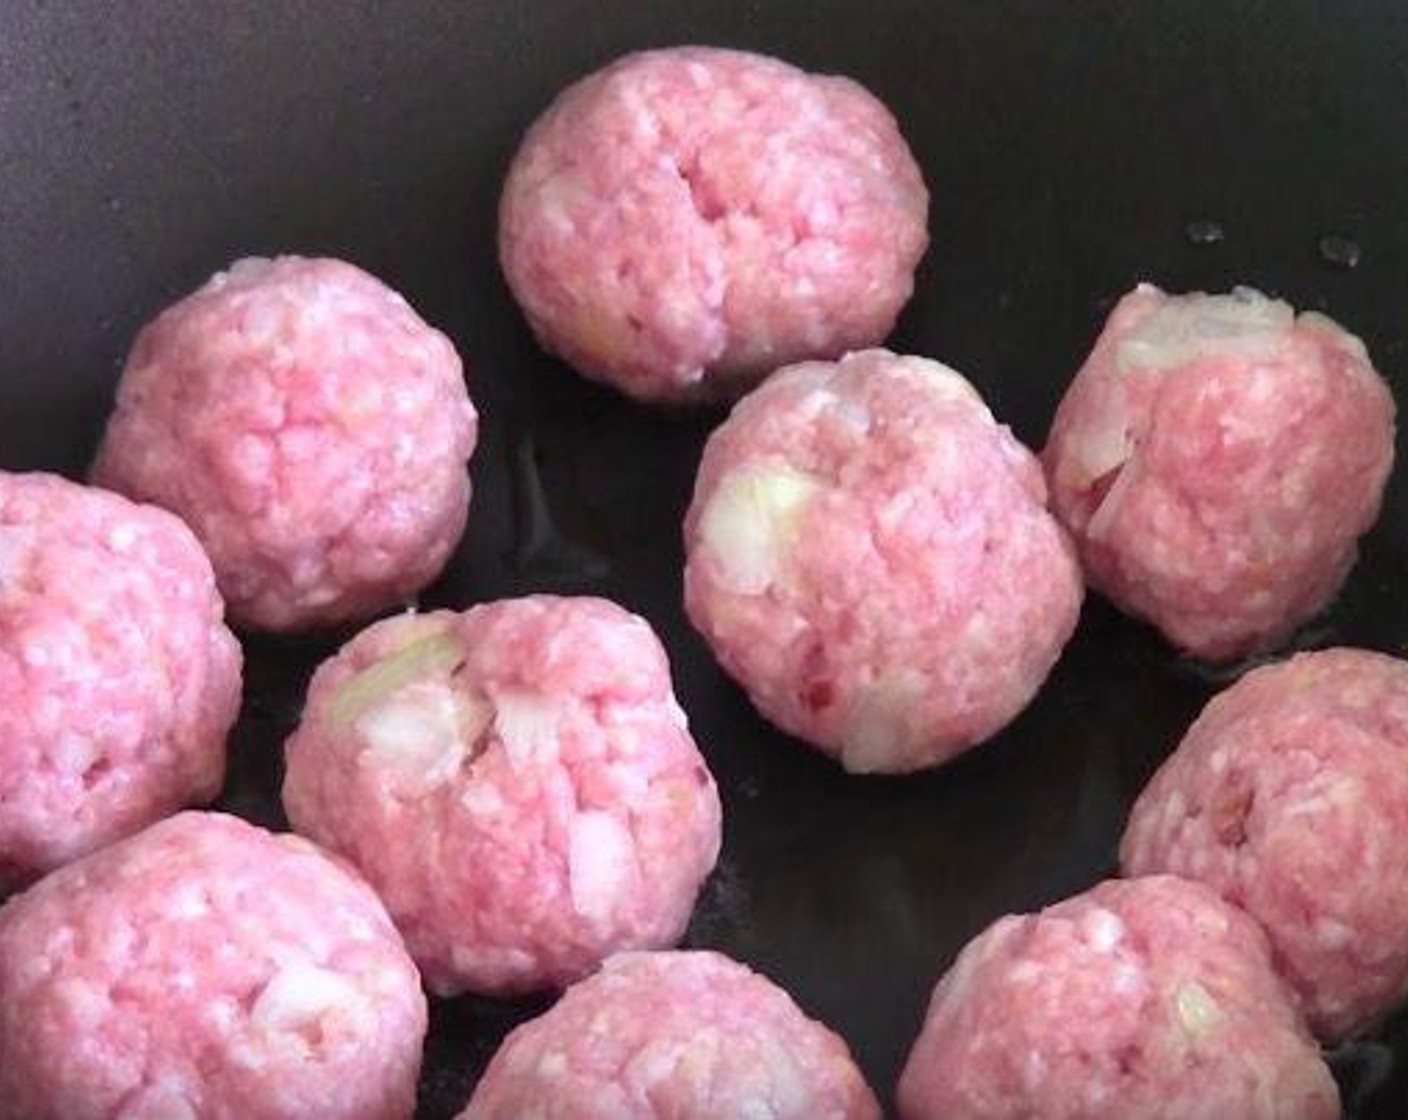 step 2 Put oil into a fry pan and cook the meatballs in batches to brown the outside for about 4 to 5 minutes. Transfer them to a large casserole dish.